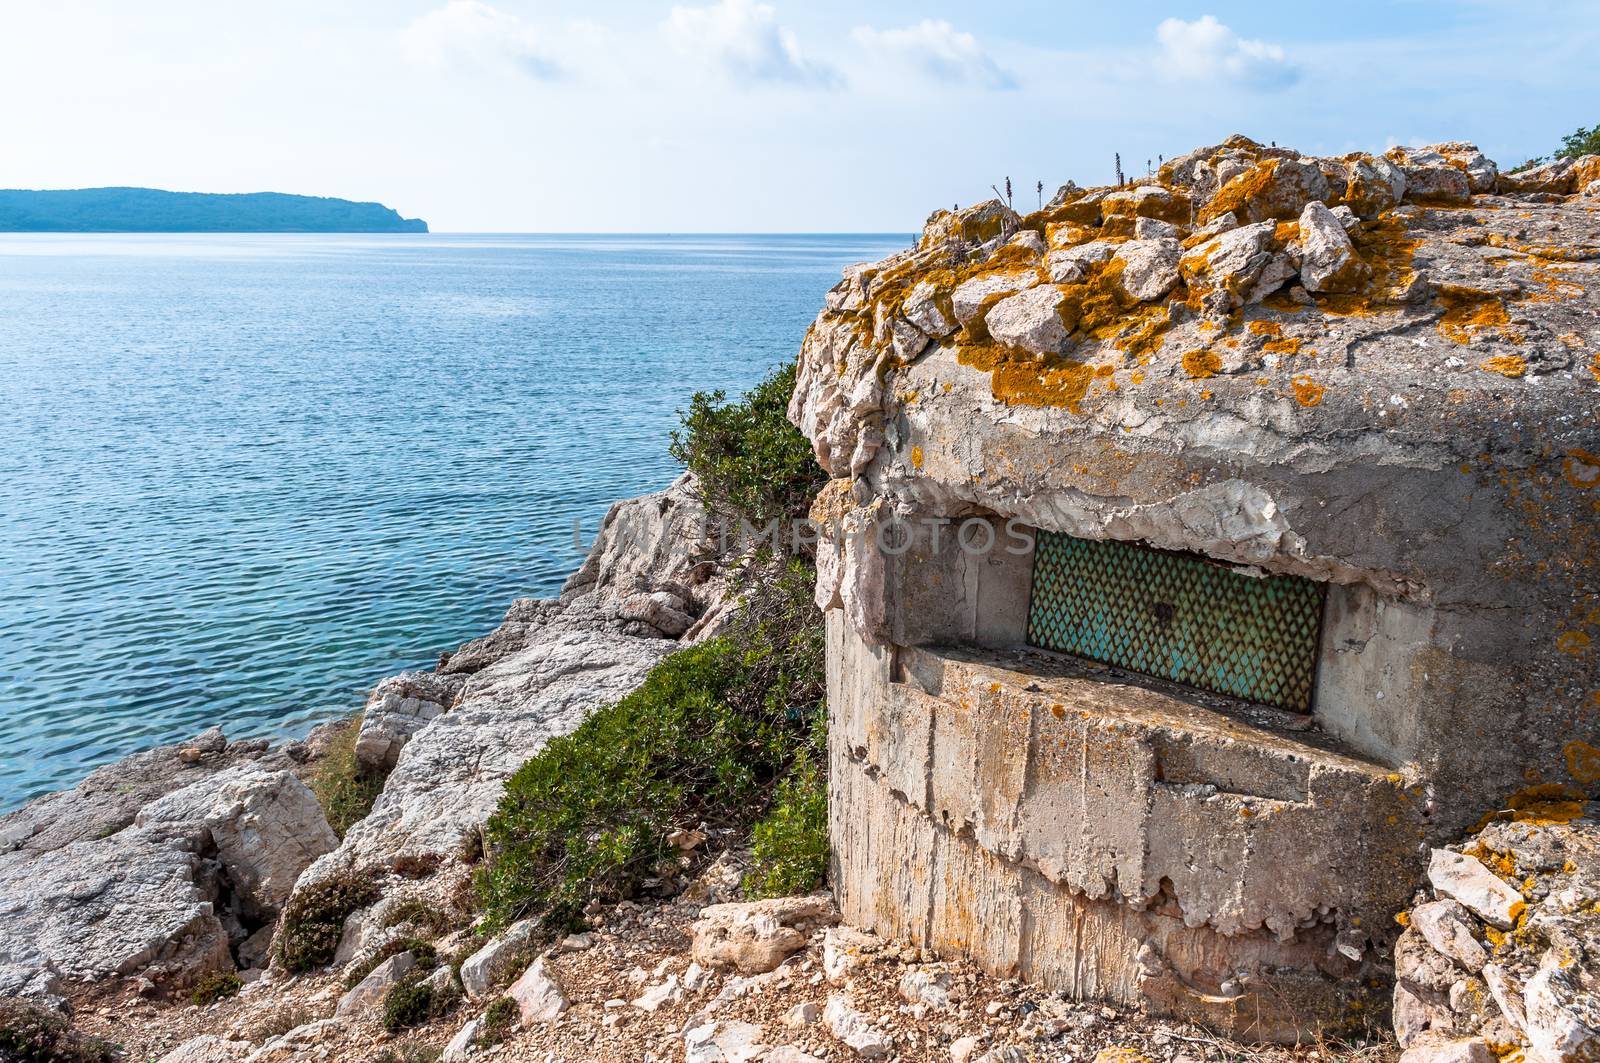 World war two bunker on the coast by replica